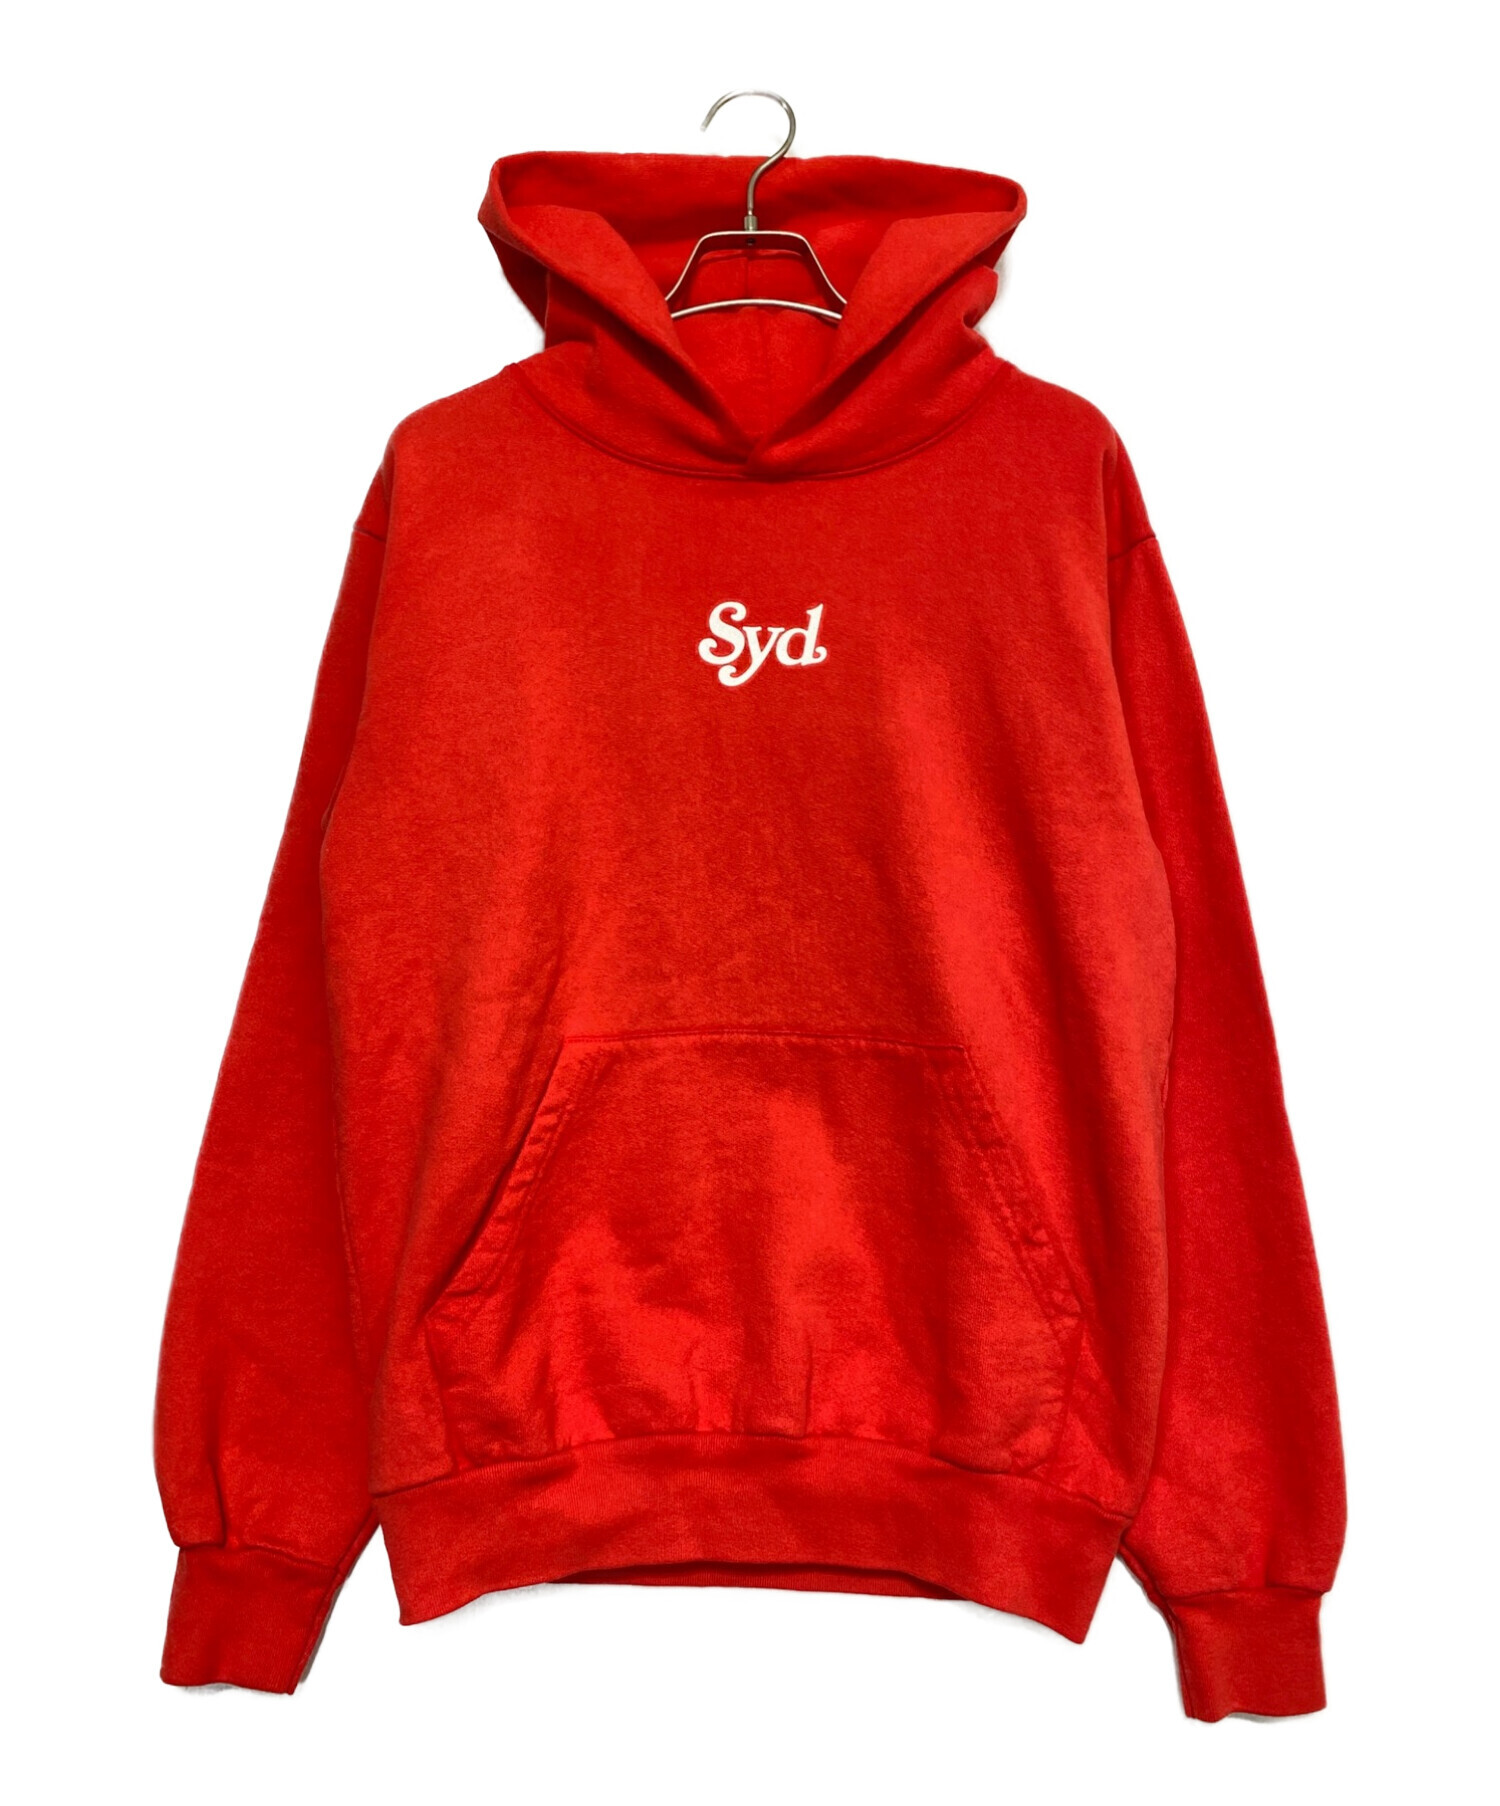 syd girls don't cry logo hoodie S